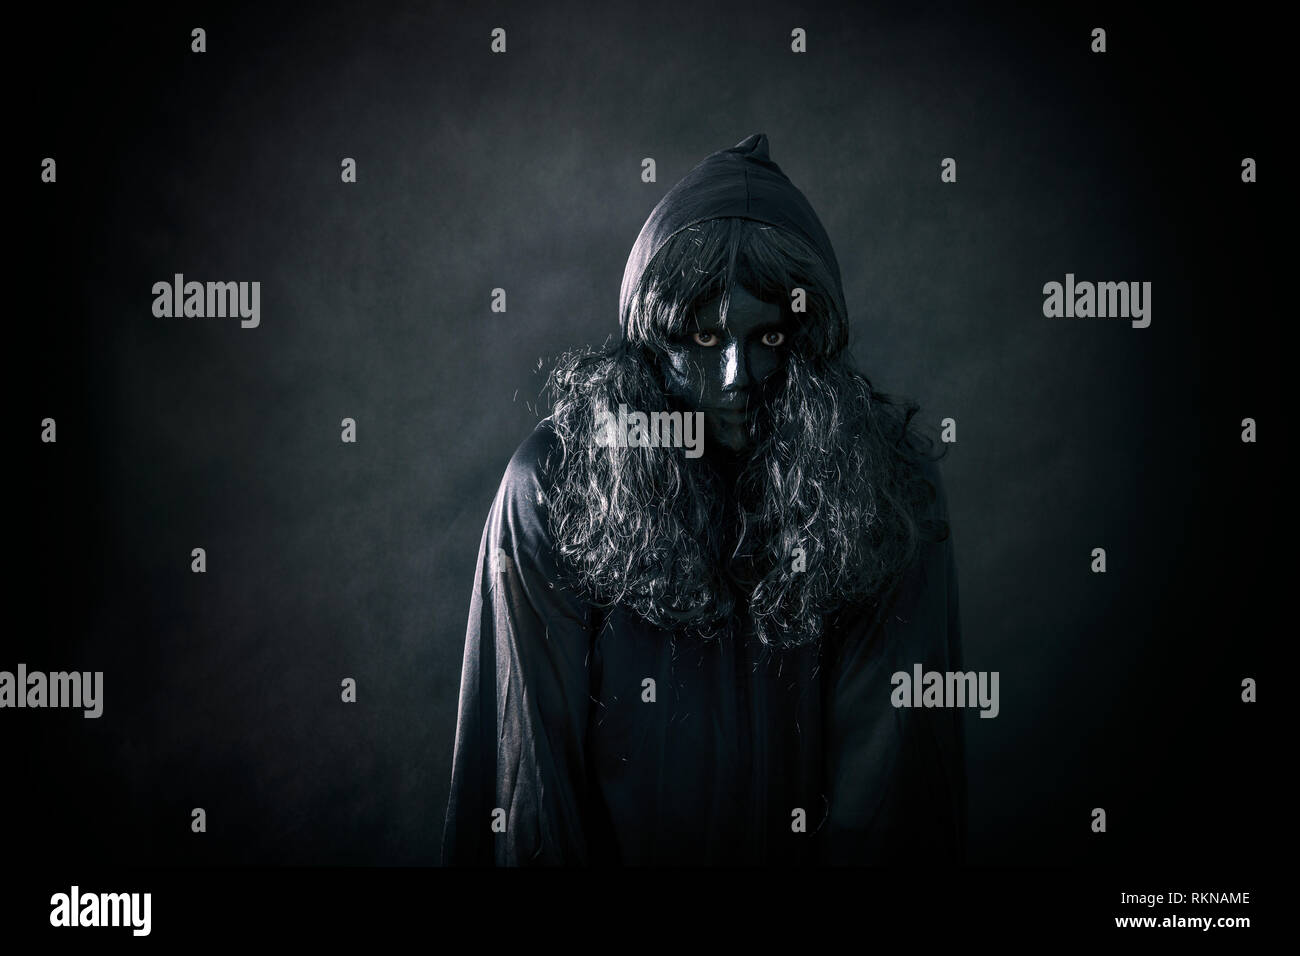 The witch in hooded cloak Stock Photo